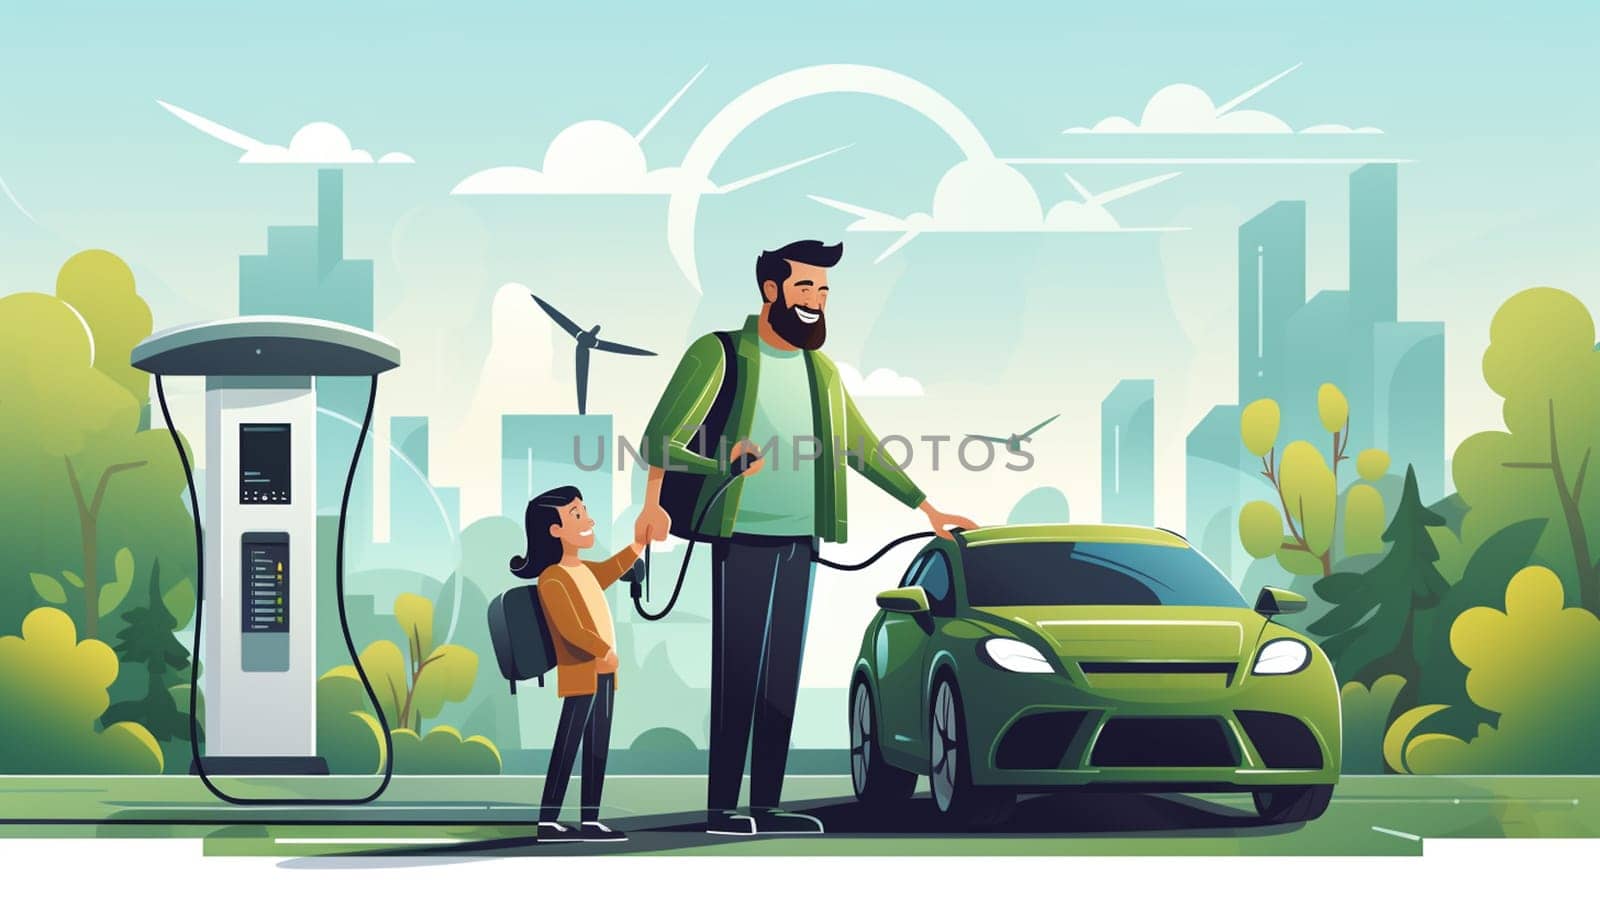 Futuristic Electric Vehicle, Electric Car Charging Station, Environmentally Friendly Transportation, Save the Earth Concept, Flat Style Illustration. by Andelov13